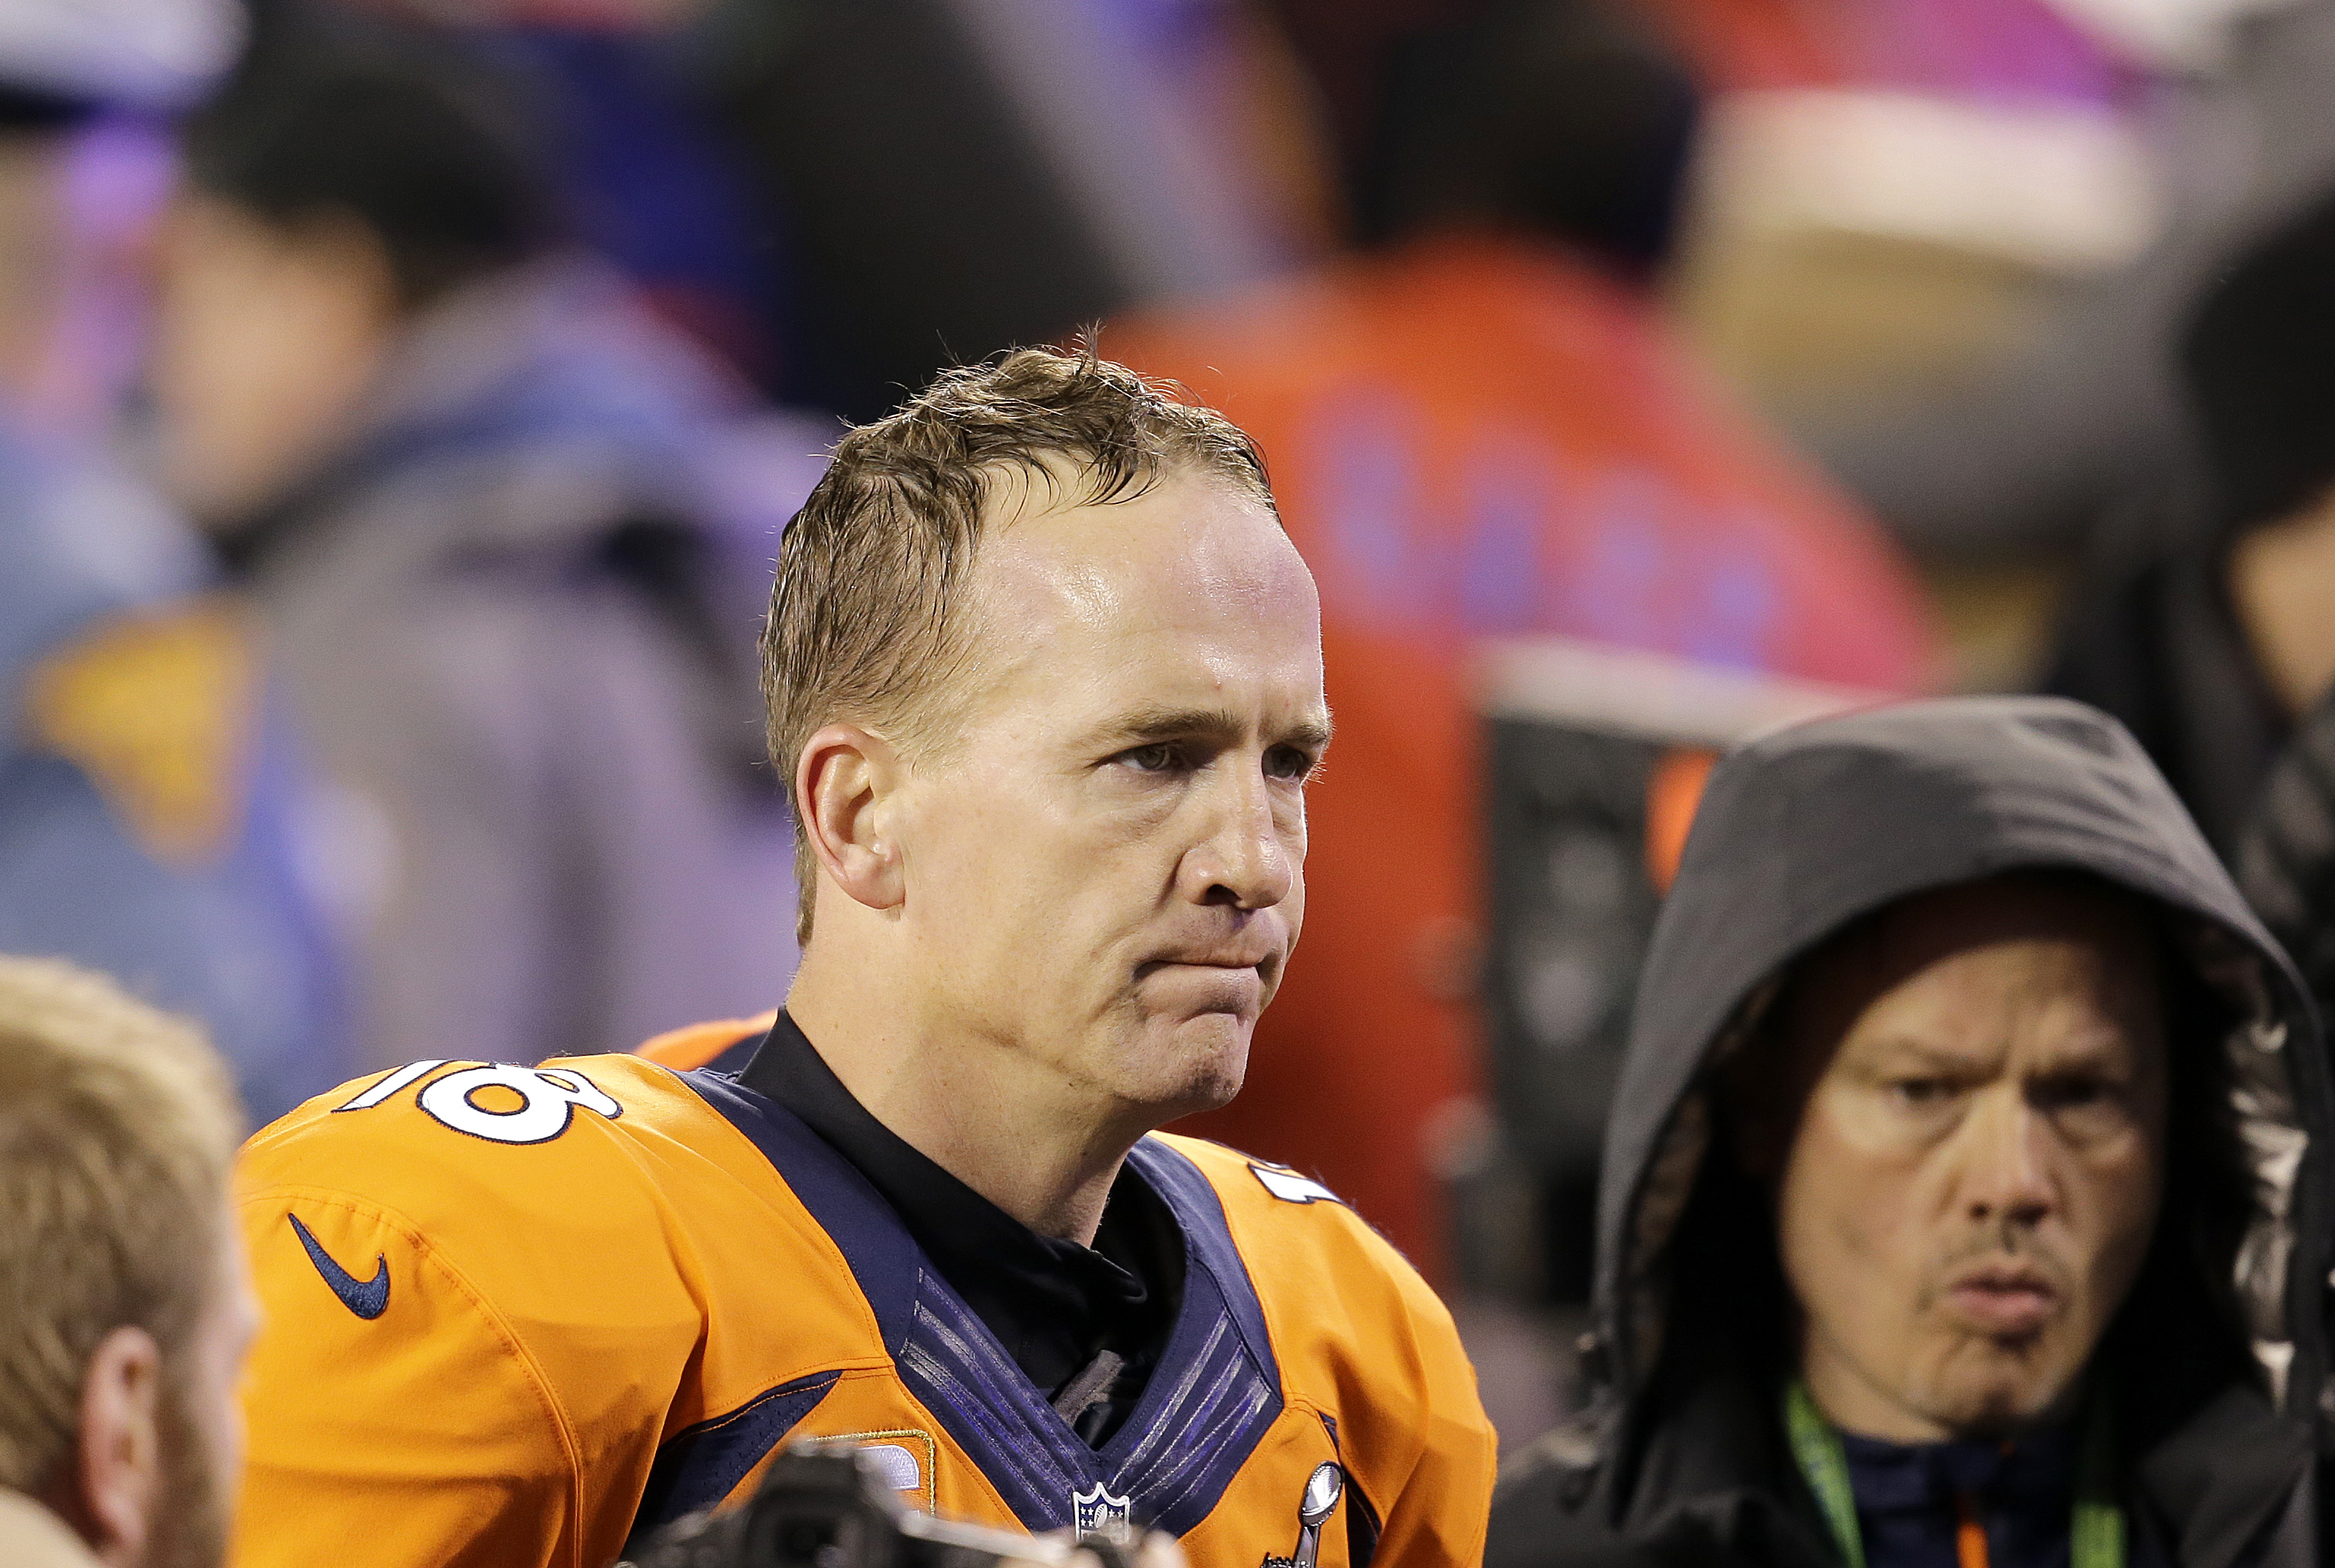 Peyton Manning will not sue Al Jazeera for linking him to HGH use